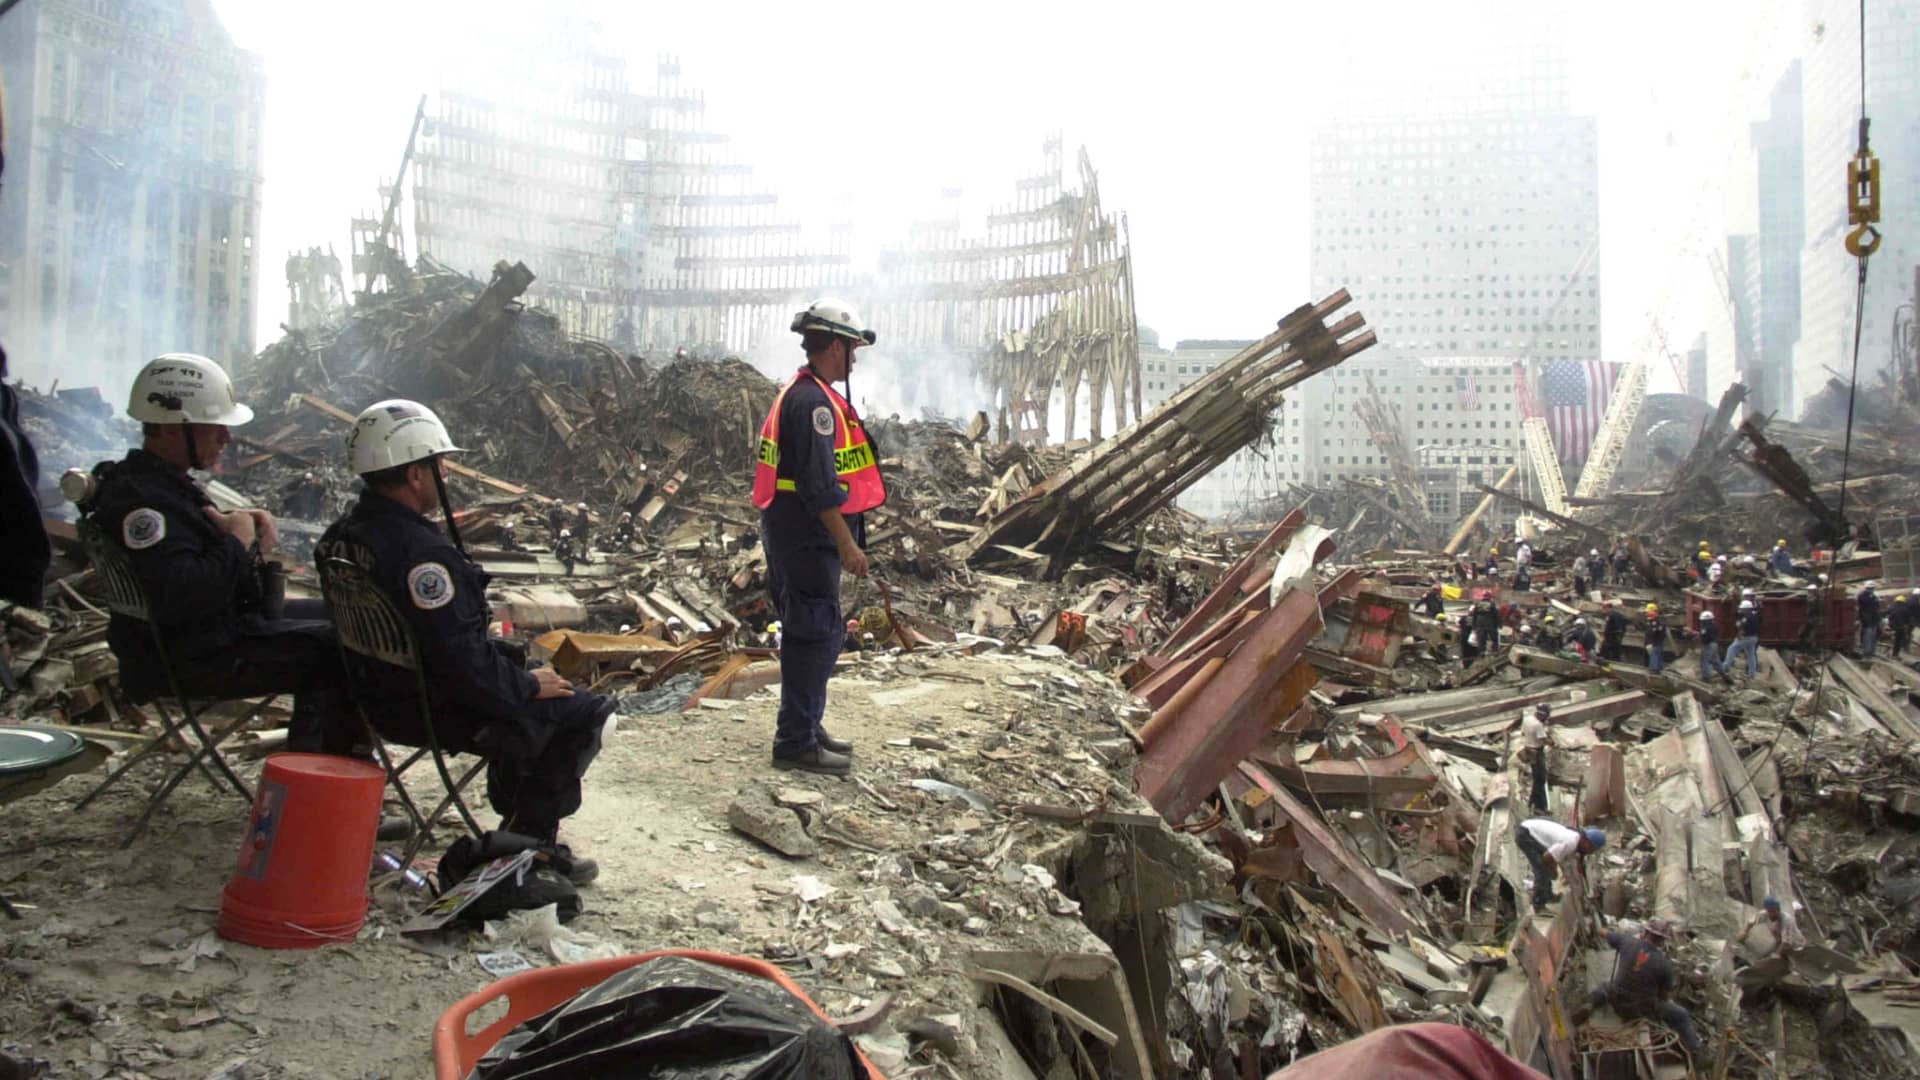 Rescue workers sift through debris at the ground Zero of what remains of the World Trade Center twin towers site, September 24, 2001.